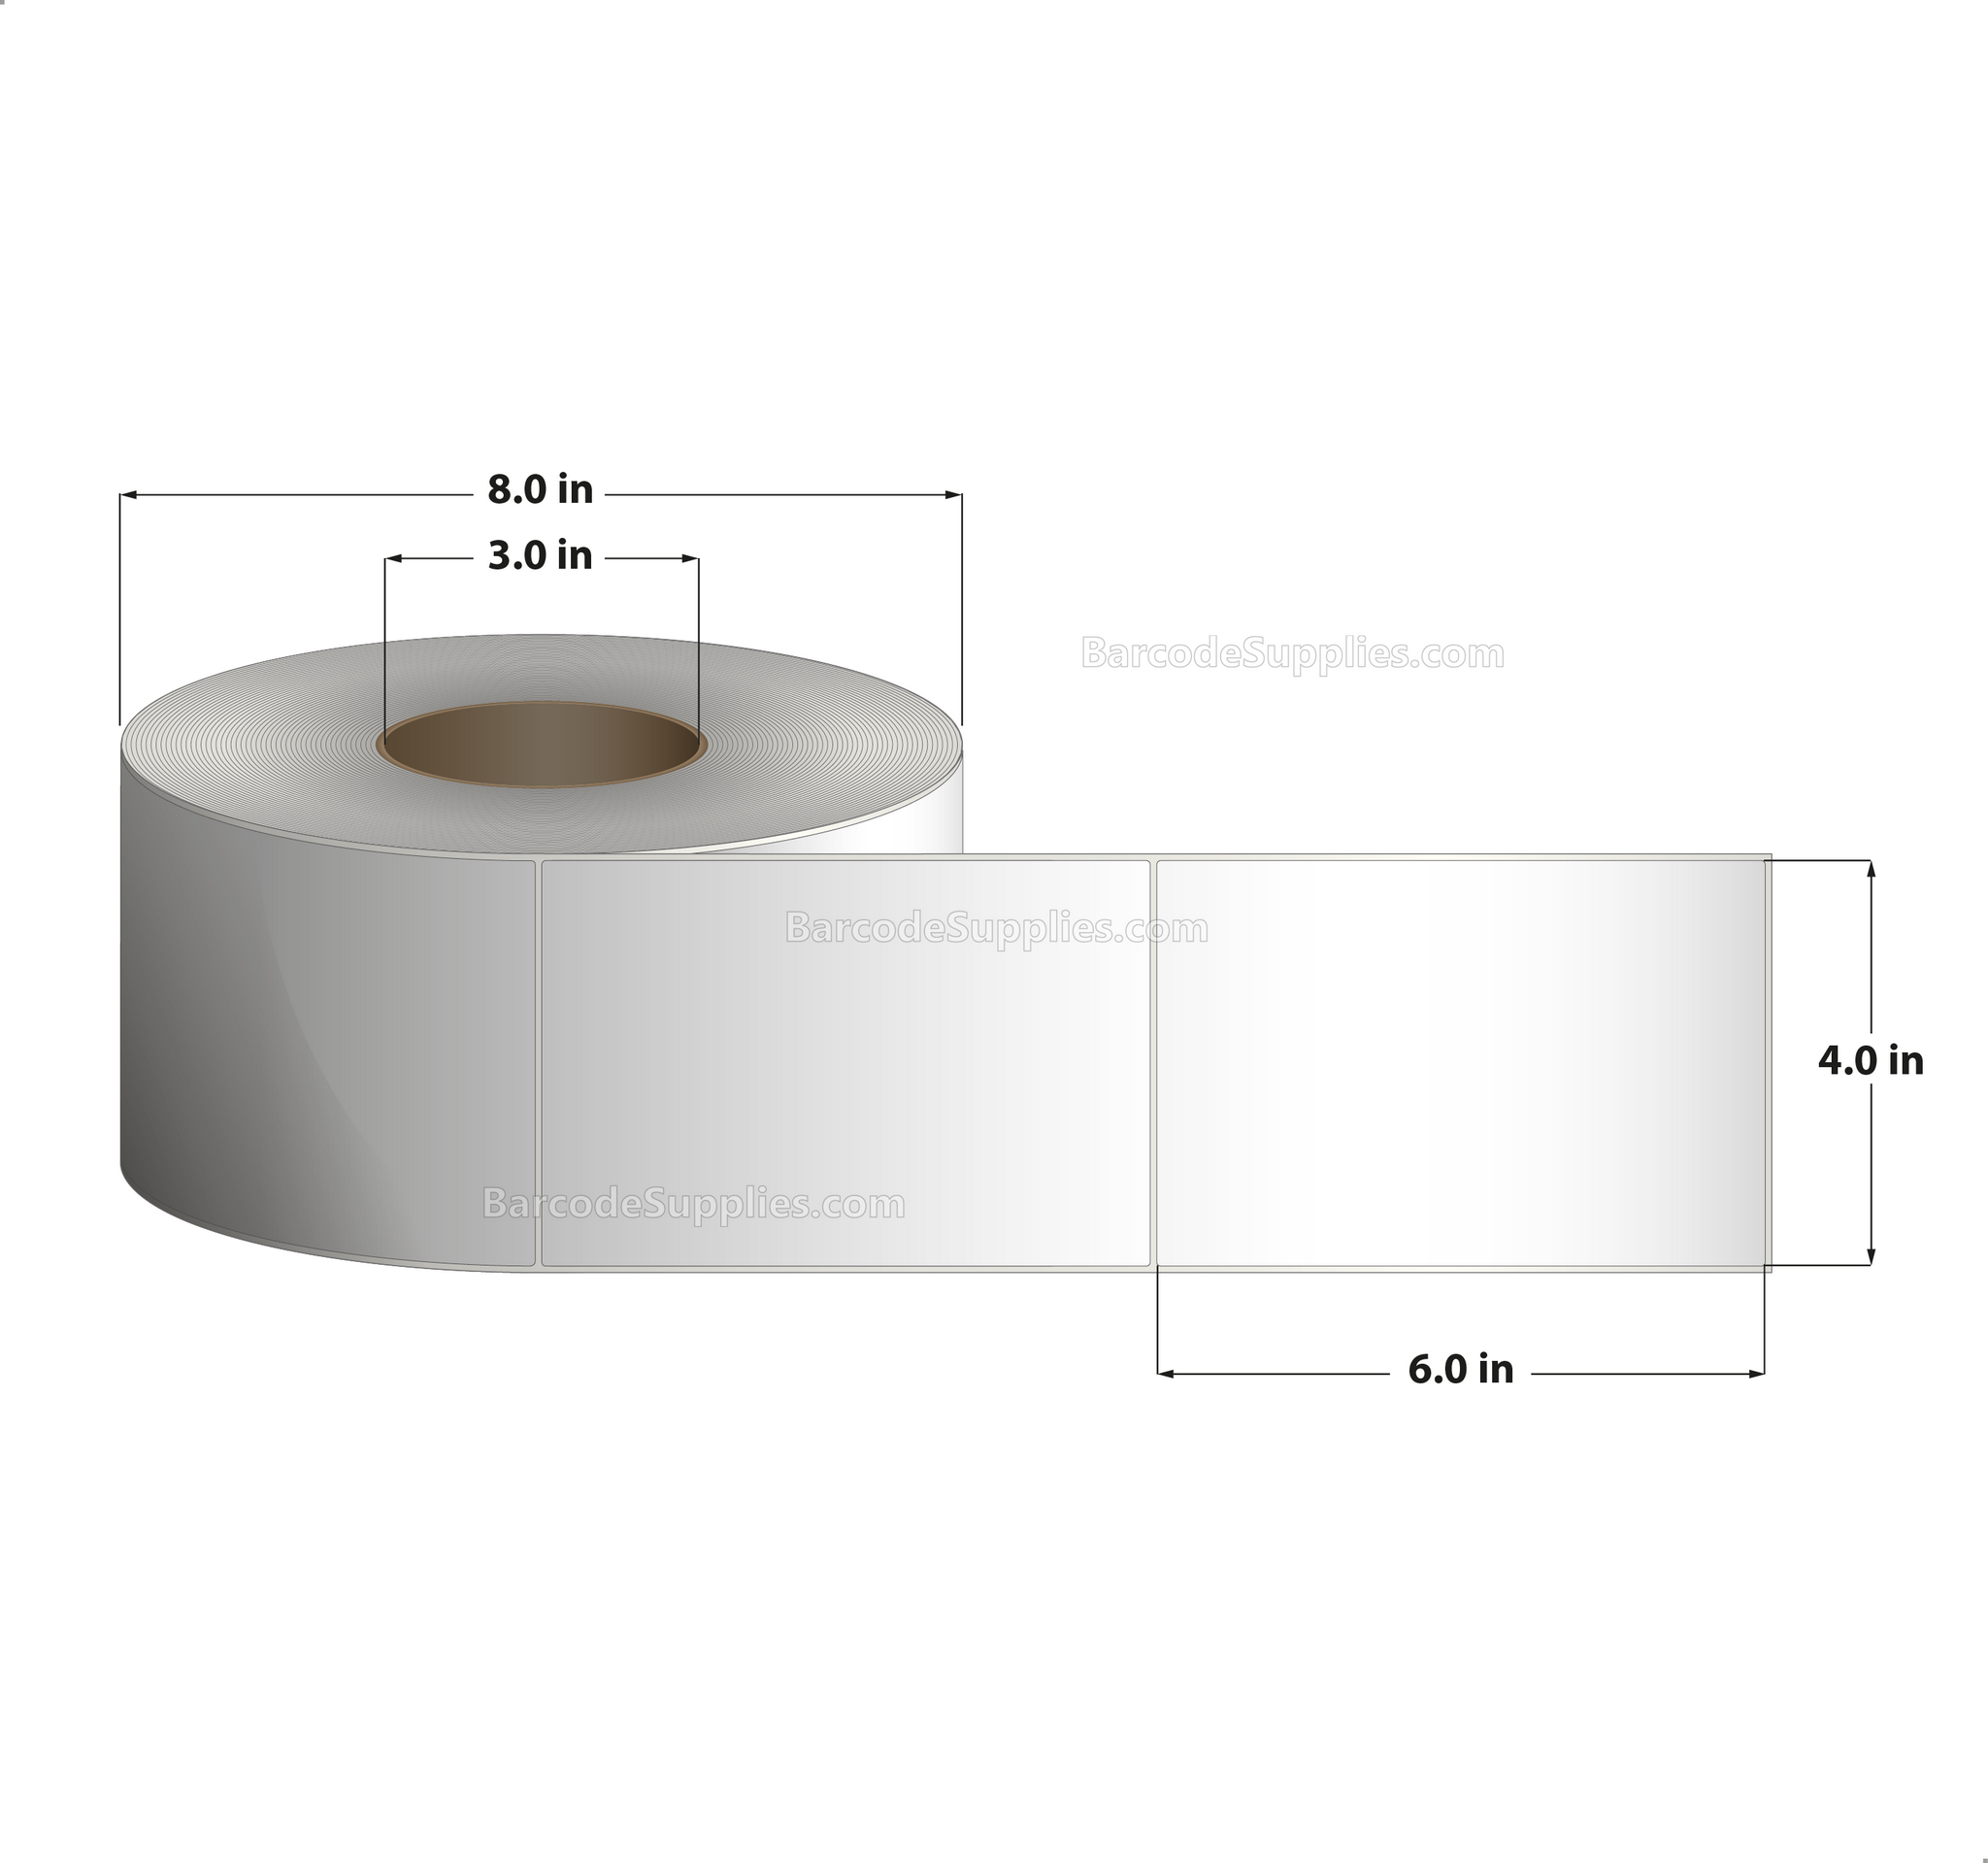 4 x 6 Direct Thermal White Labels With Rubber Adhesive - No Perforation - 1000 Labels Per Roll - Carton Of 4 Rolls - 4000 Labels Total - MPN: DT400600-3